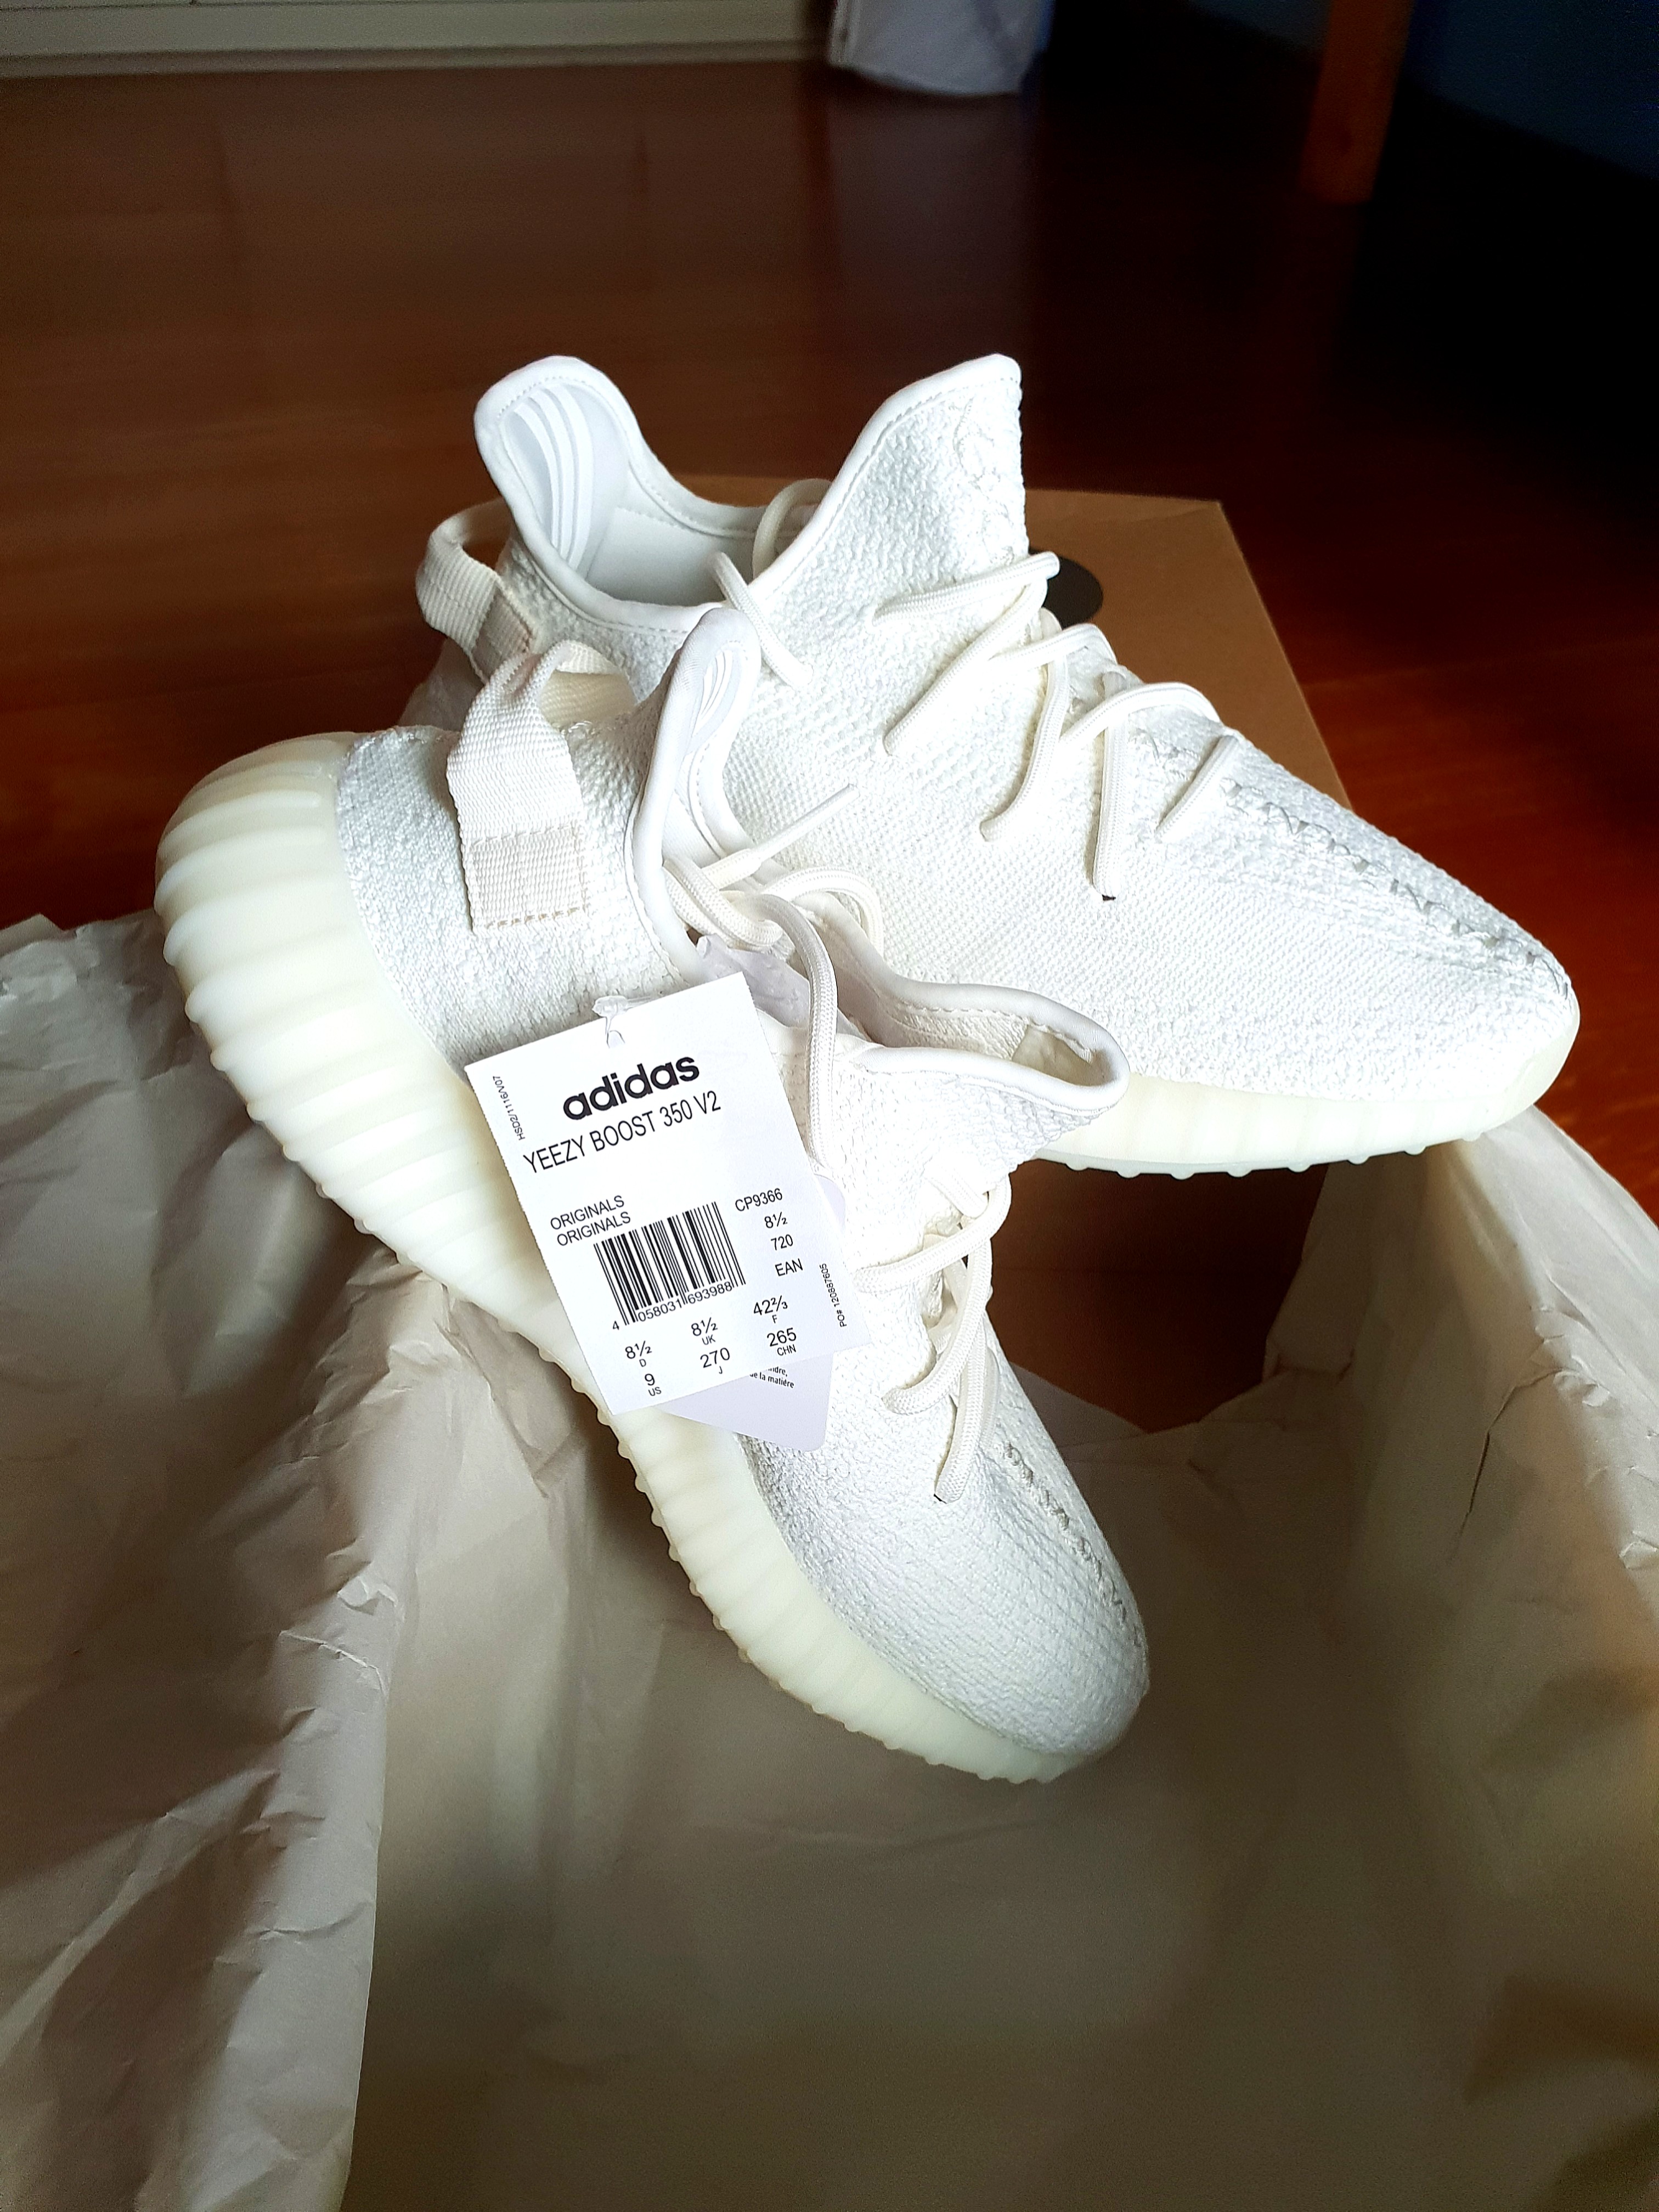 yeezy supply triple white shipping